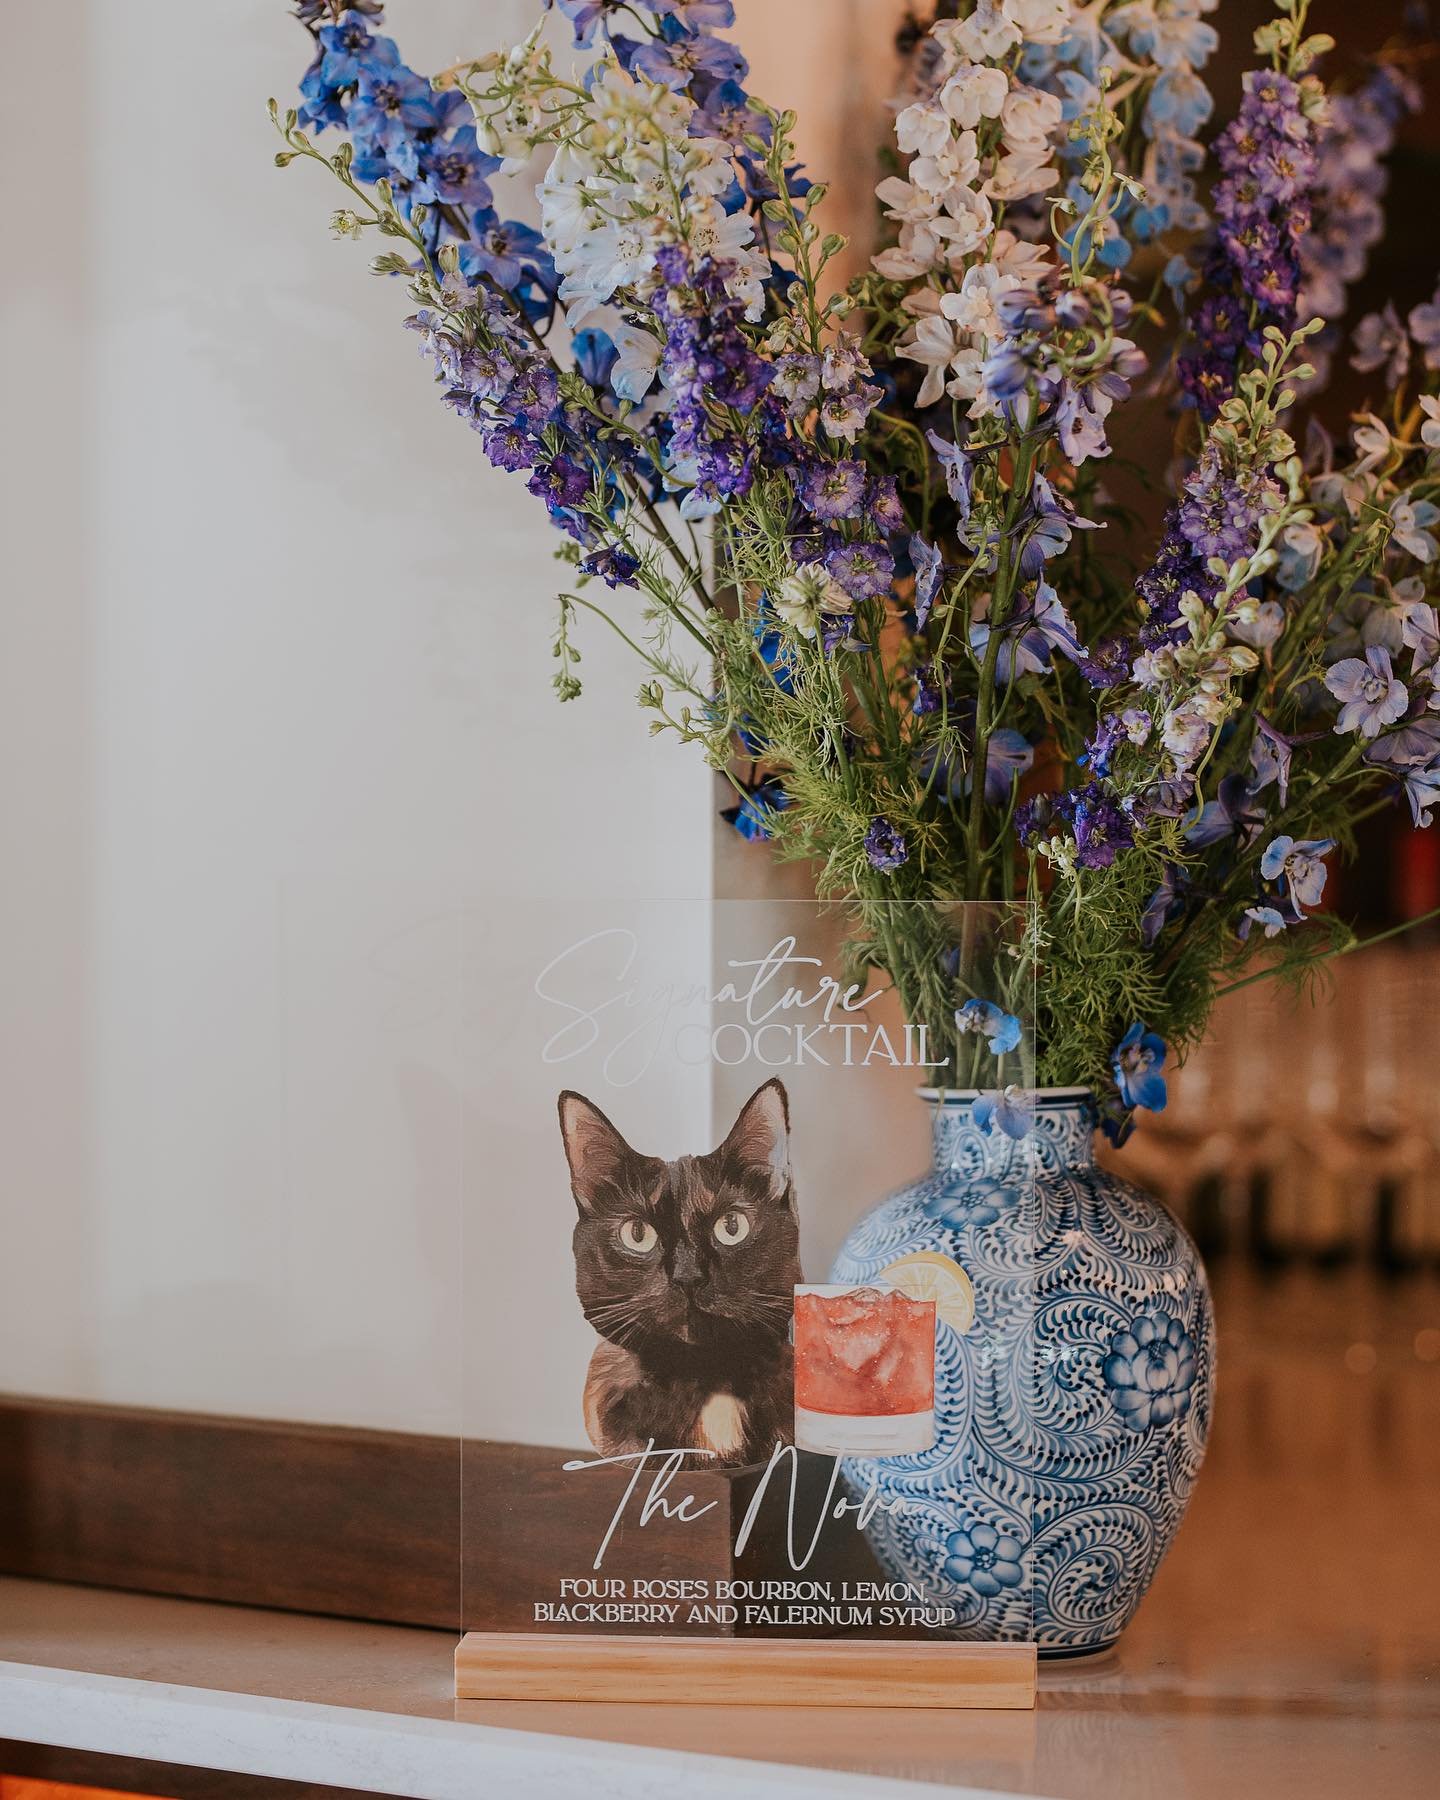 Not sure what we love more in this photo&ndash; the blue and white urn, the tall delphinium, or that Nova, our couple&rsquo;s cat is on the bar menu!

Photo: @edeninglephoto 
Venue: @thesaintelle 
Florals: @sunburstflorals 
Planning: @wevents 
&bull;